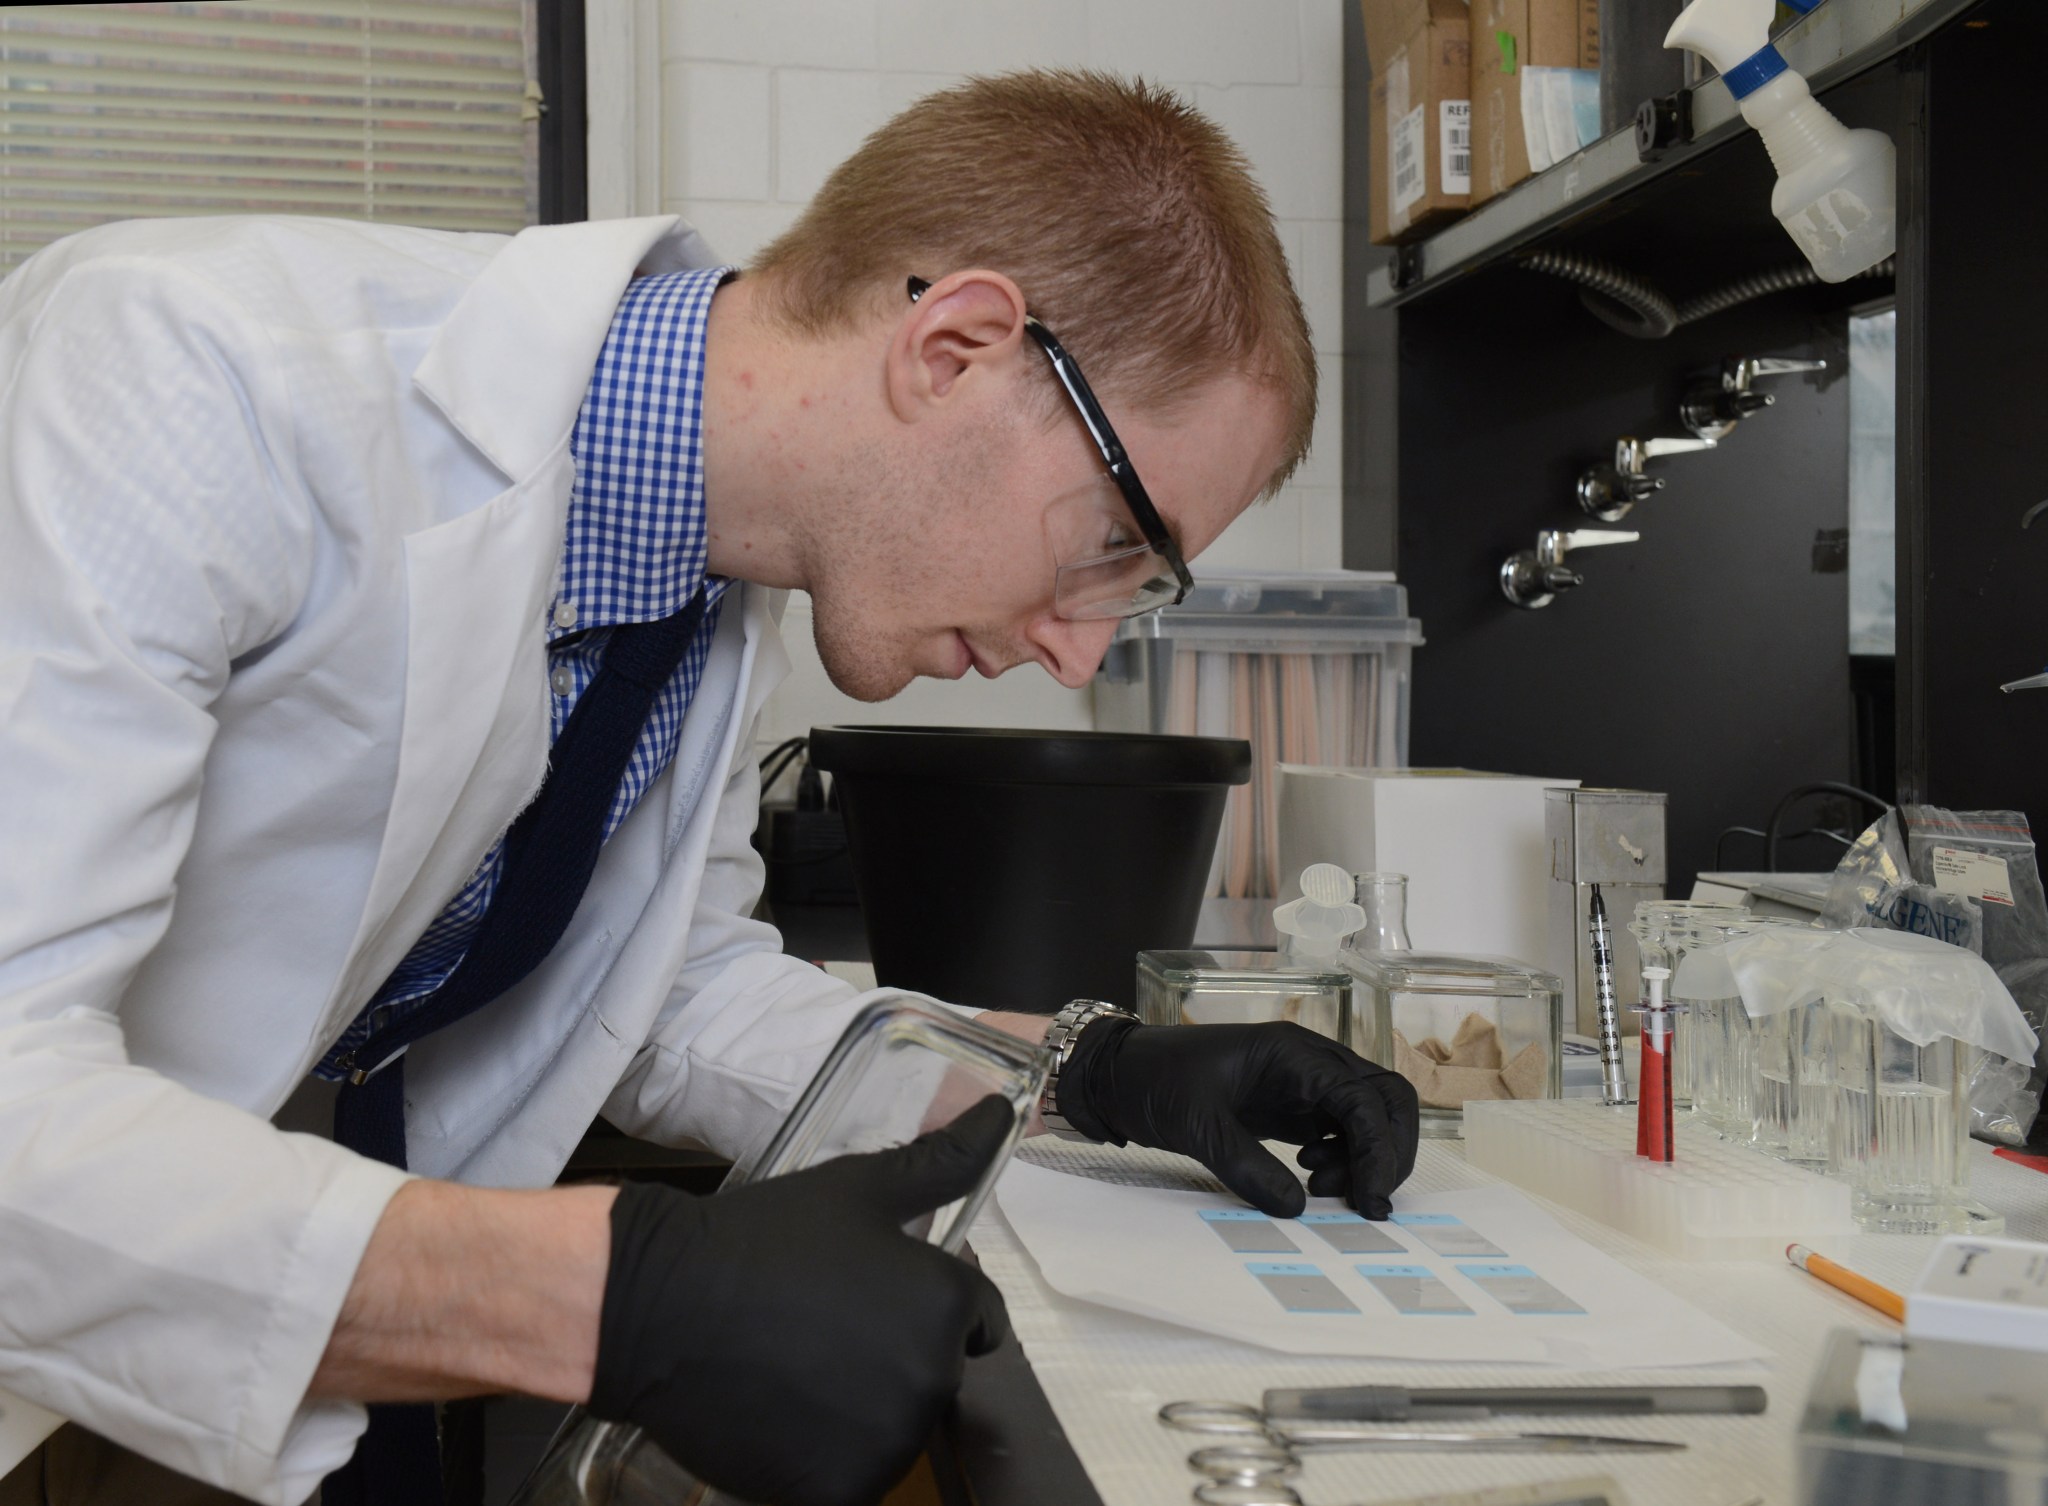 Eric Yarns, primary Research Assistant for Micro-11, examining sperm on microscope slides.